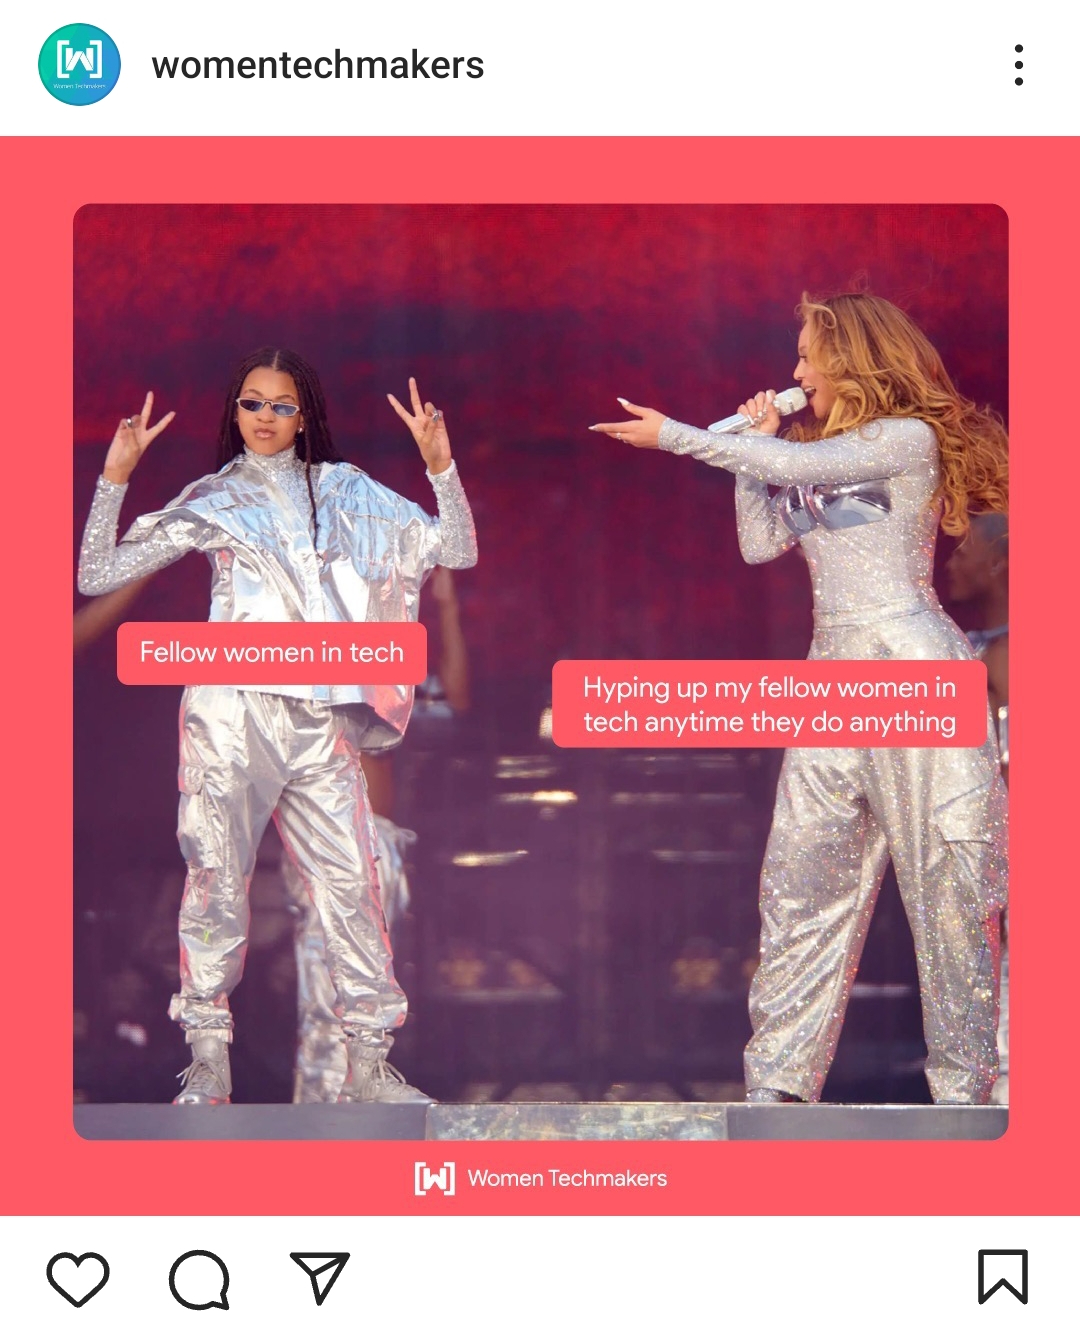 A meme featuring Blue Ivy Carter on the right with the text 'Fellow women in tech' on the right, and Beyonce on the left hand side pointing at her with the text: 'Hyping up my fellow women in tech anytime they do anything'.